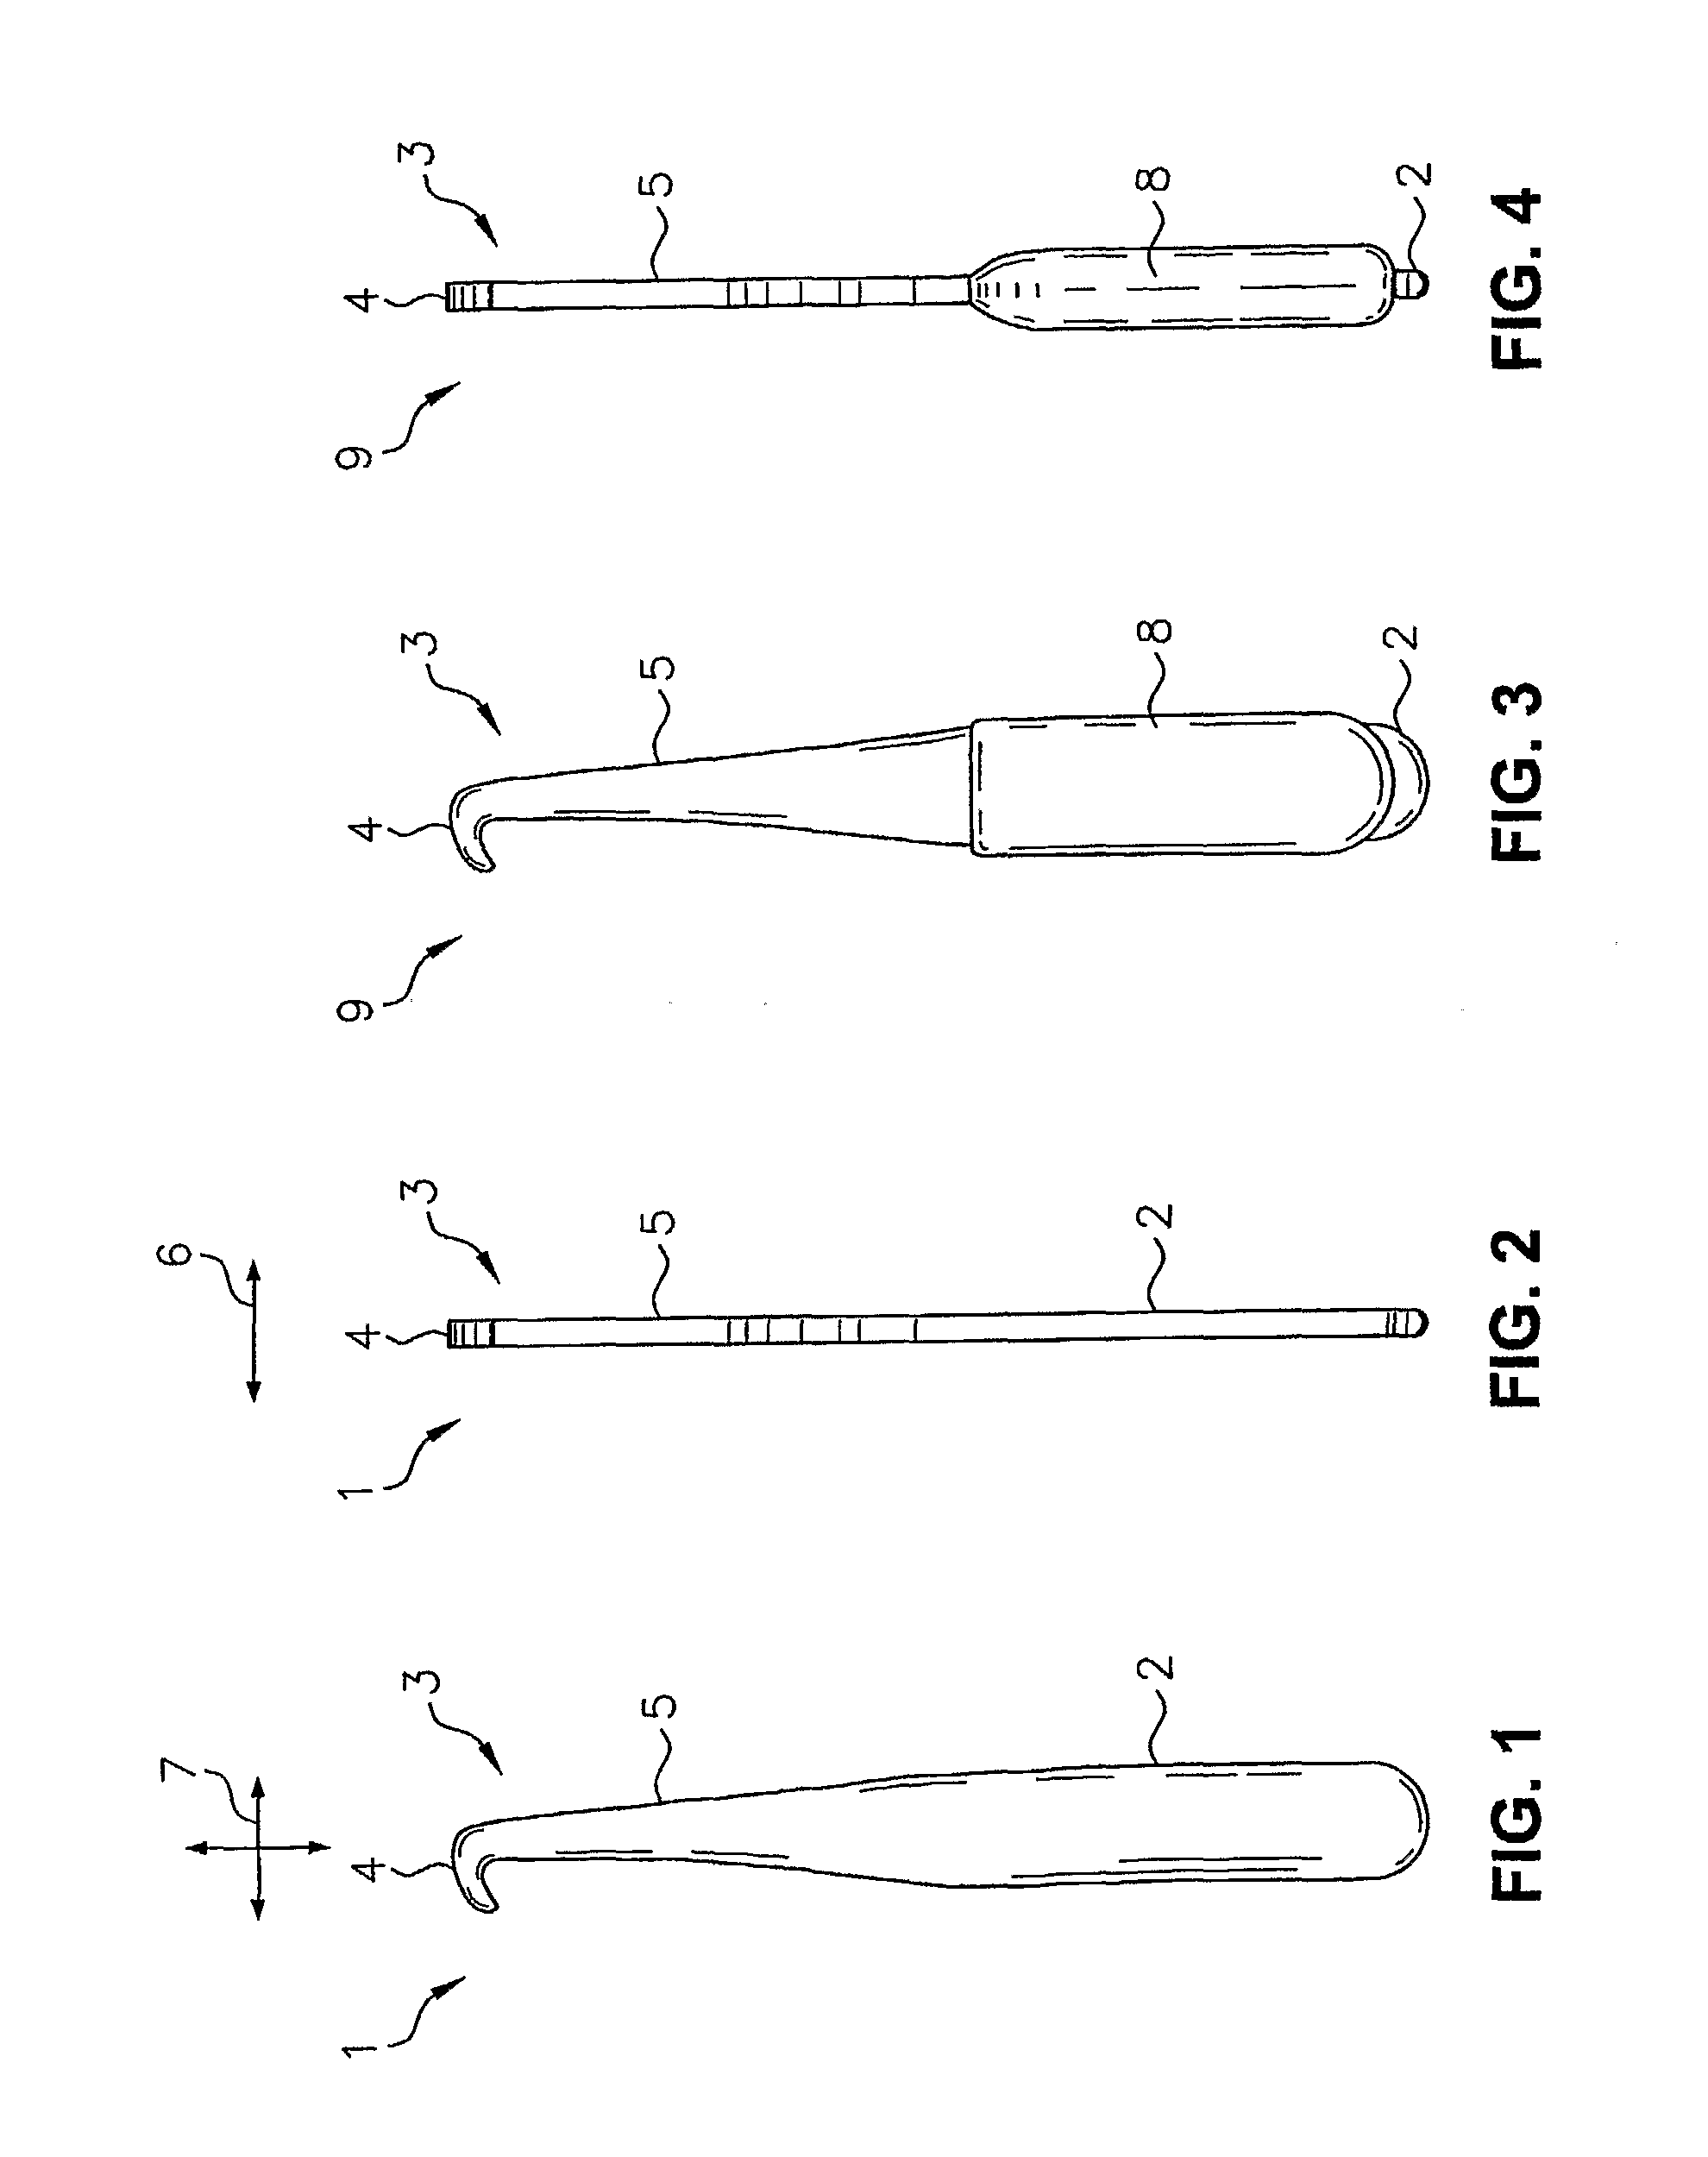 Apparatus for cleaning orthodontic and dental appliances